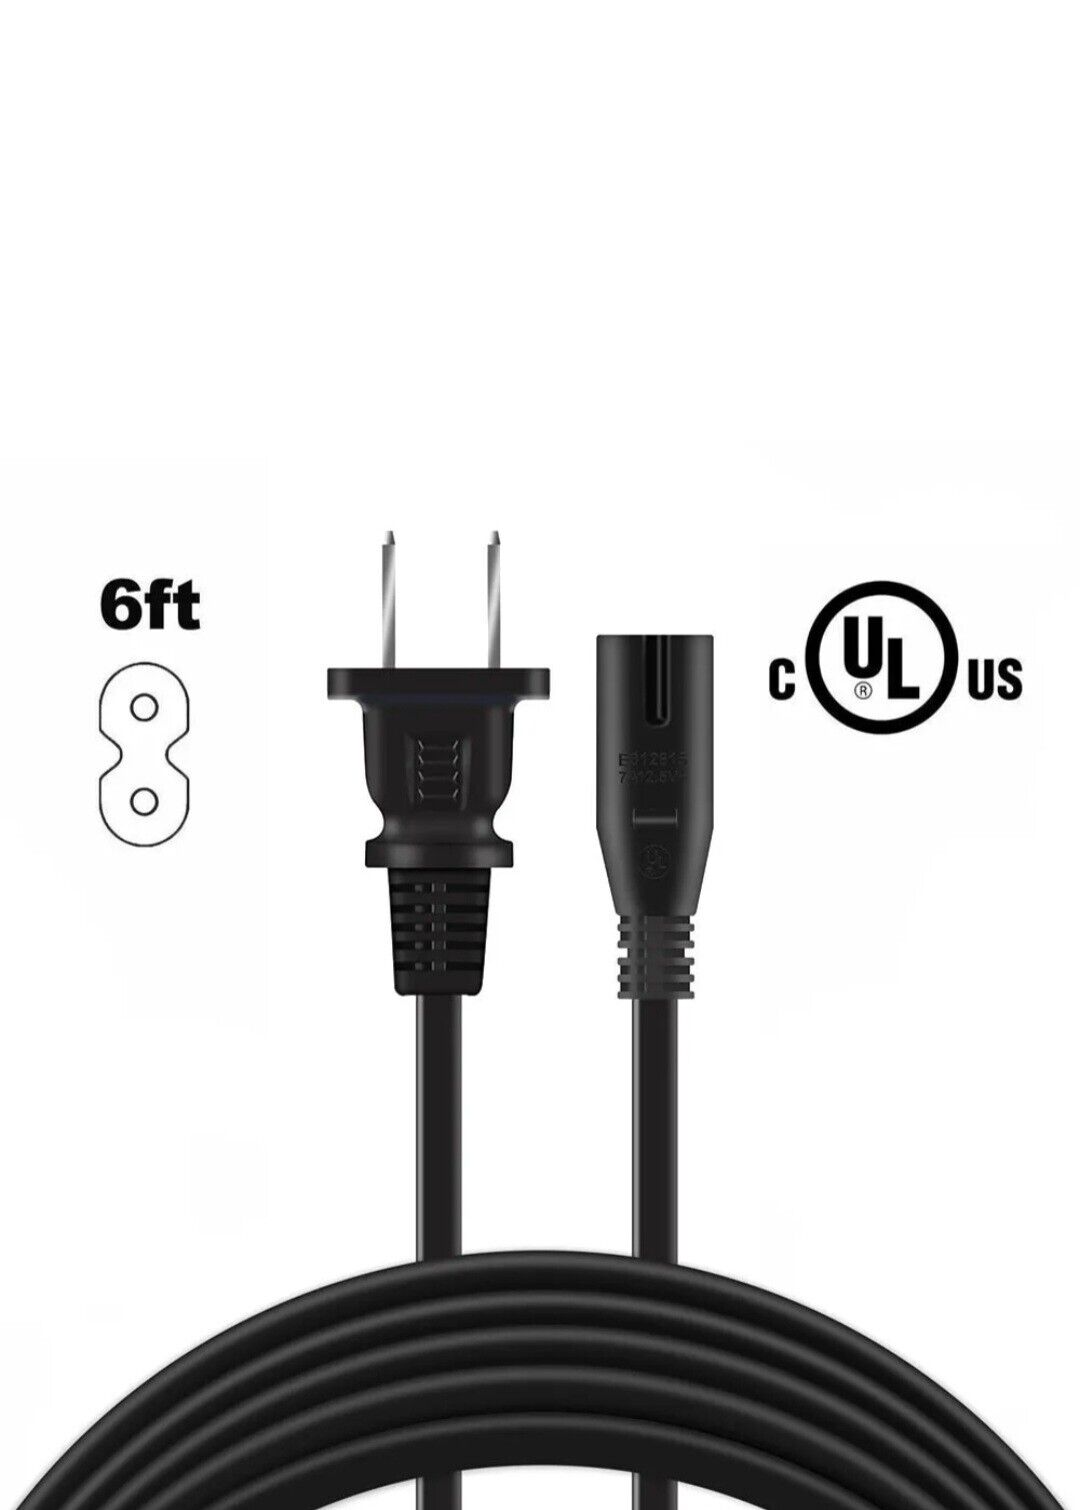 UL AC Power Cord 6Ft 2 Prong Figure 8 For Sony Samsung LCD LED TV Printer Laptop